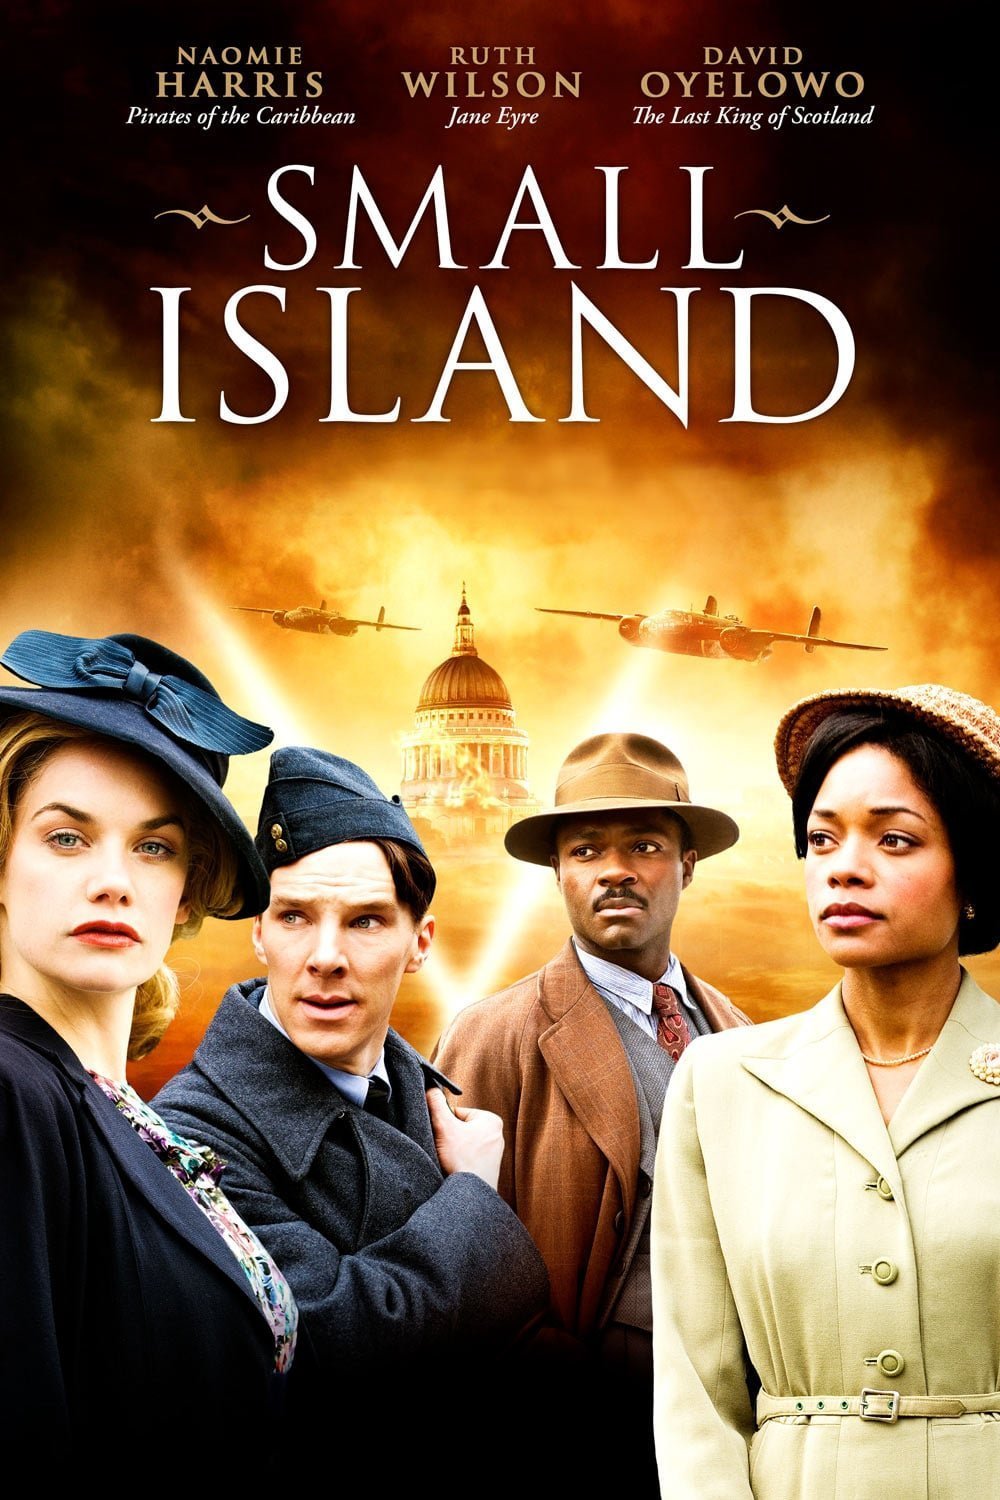 Poster of the movie Small Island